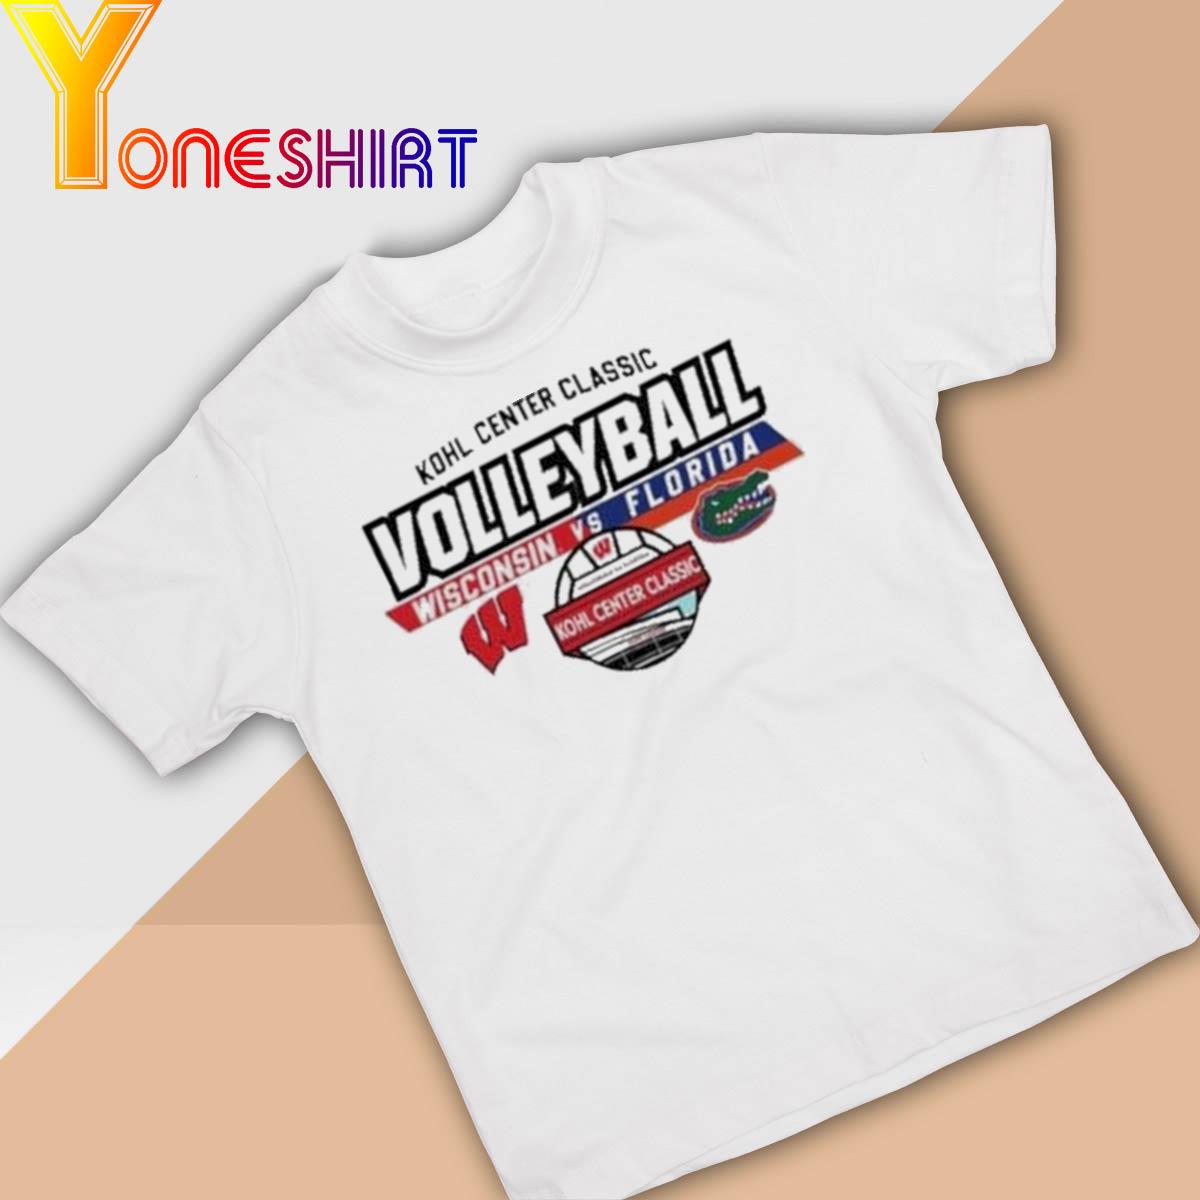 Official Wisconsin Badgers Vs Florida Gators 2022 Kohl Center Classic Volleyball Matchup T-Shirt